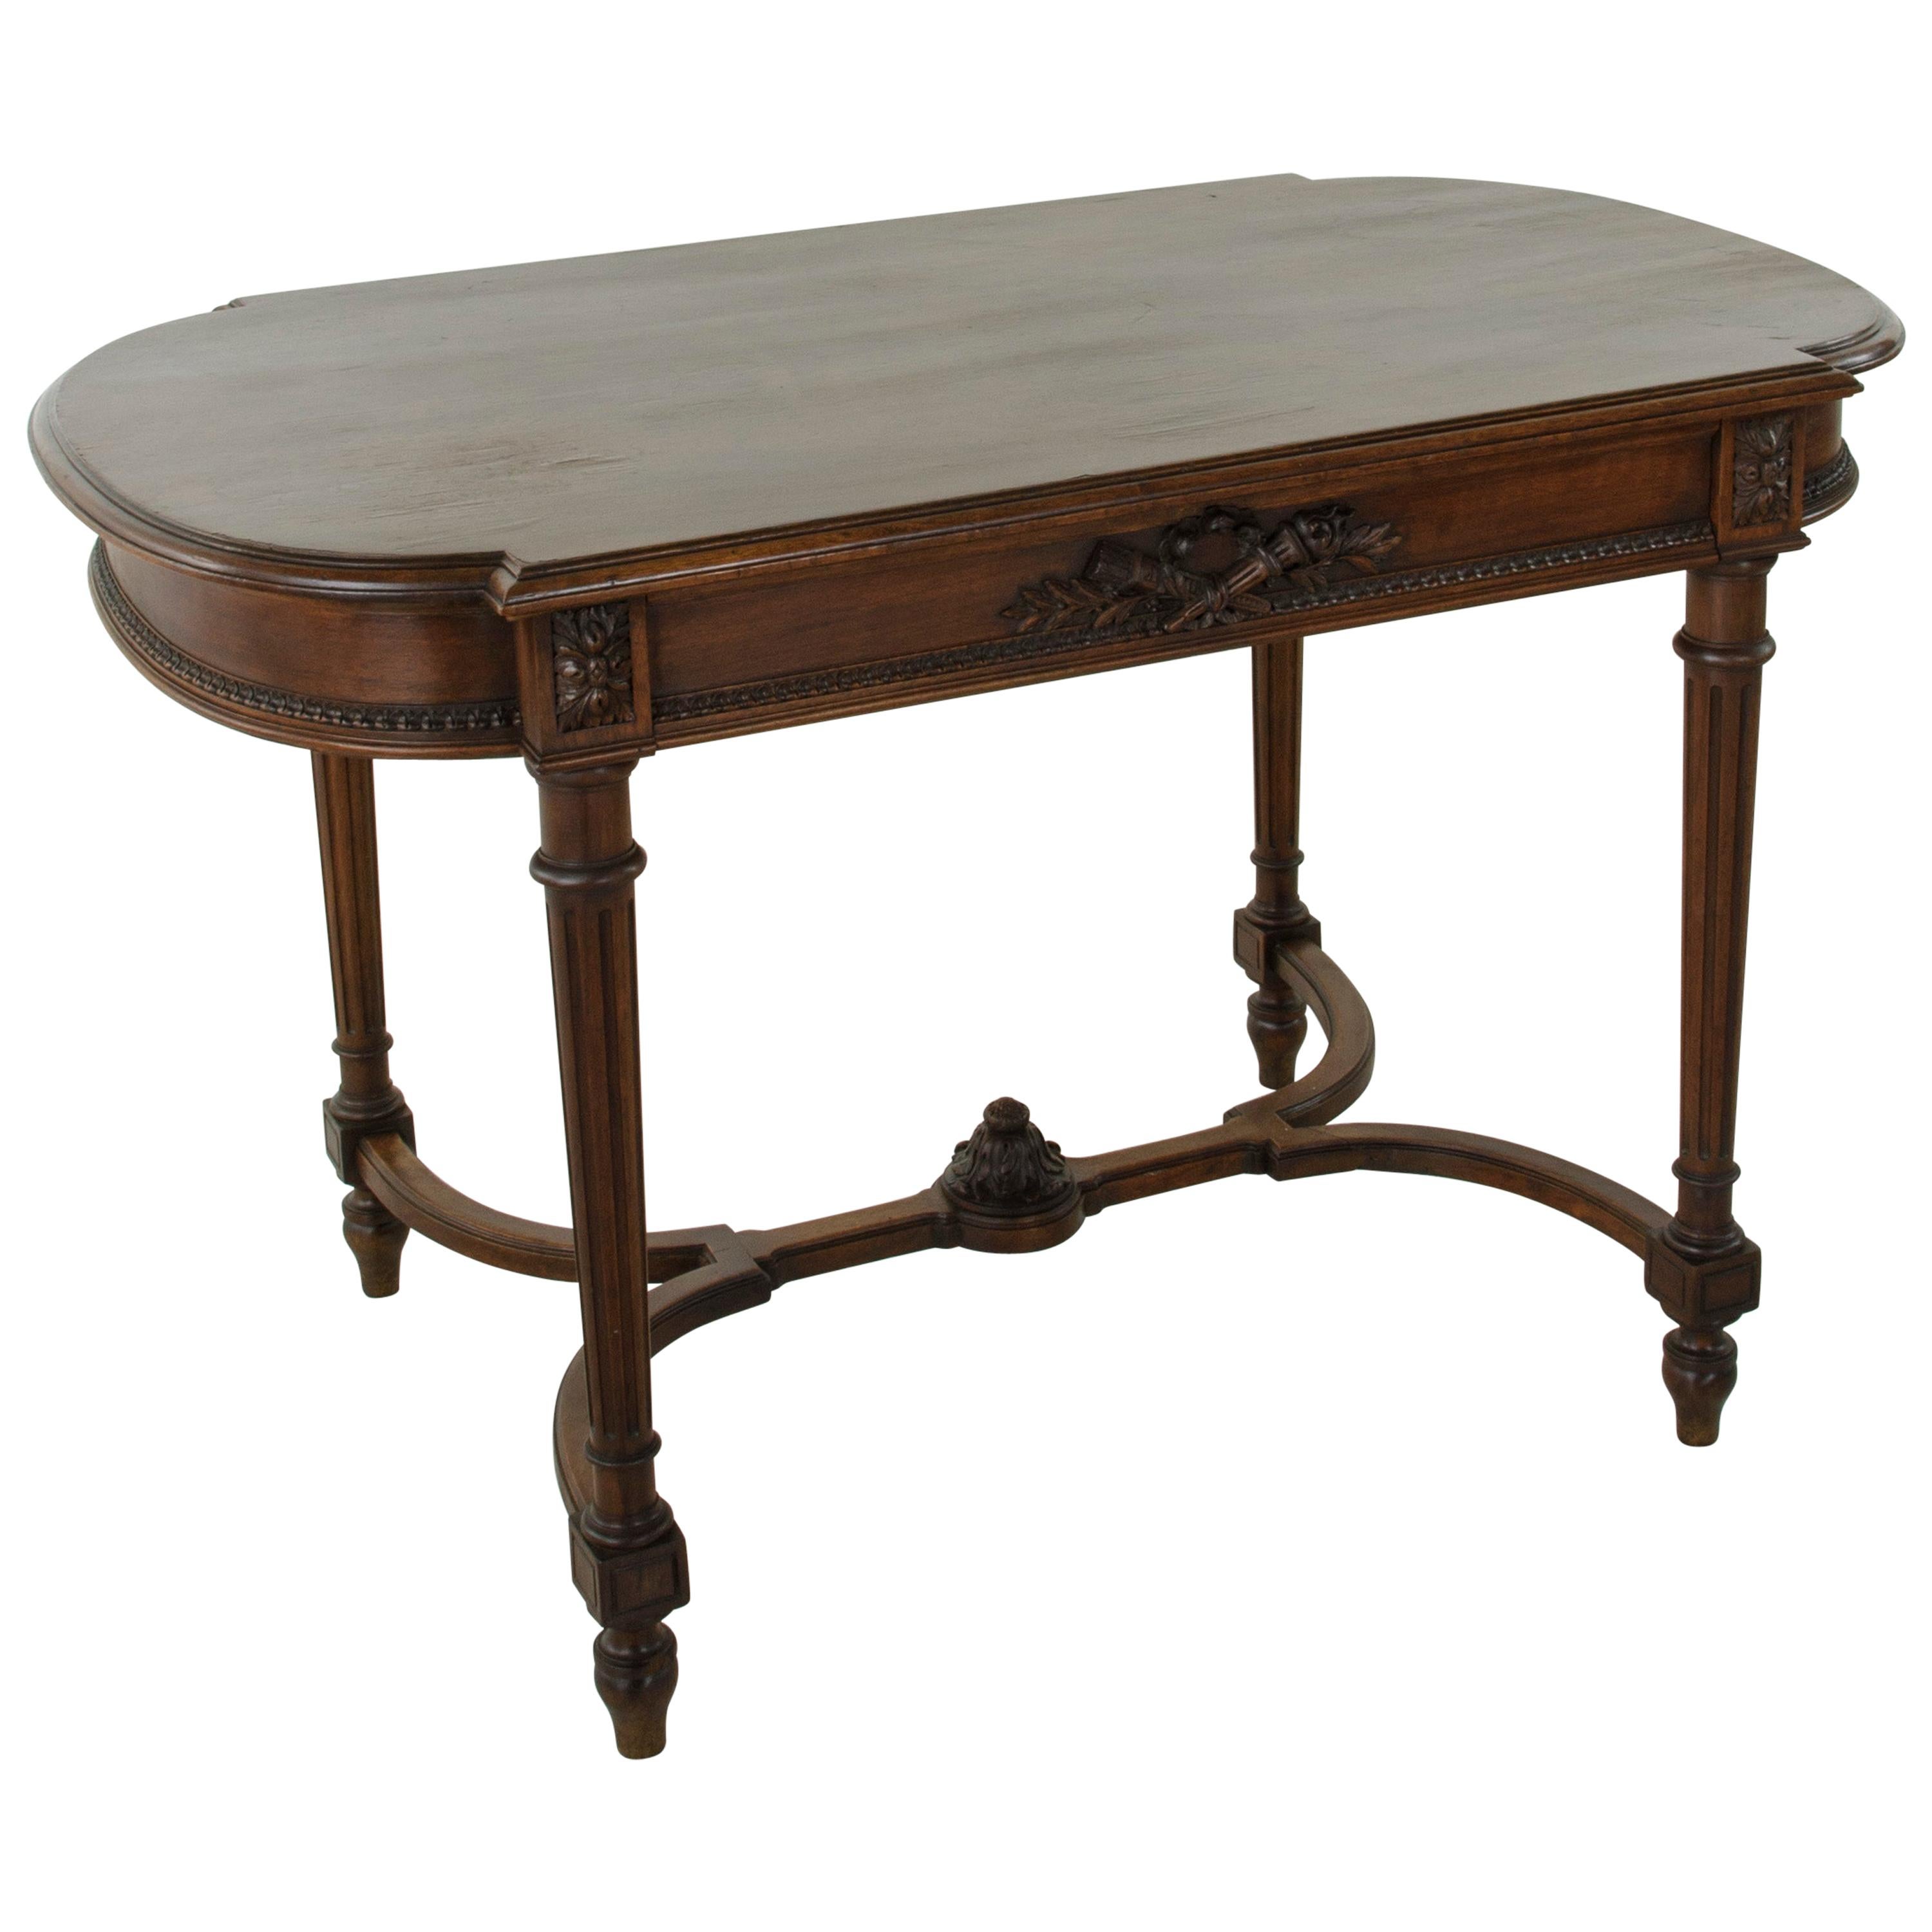 Late 19th Century French Louis XVI Style Hand Carved Walnut Desk, Writing Table